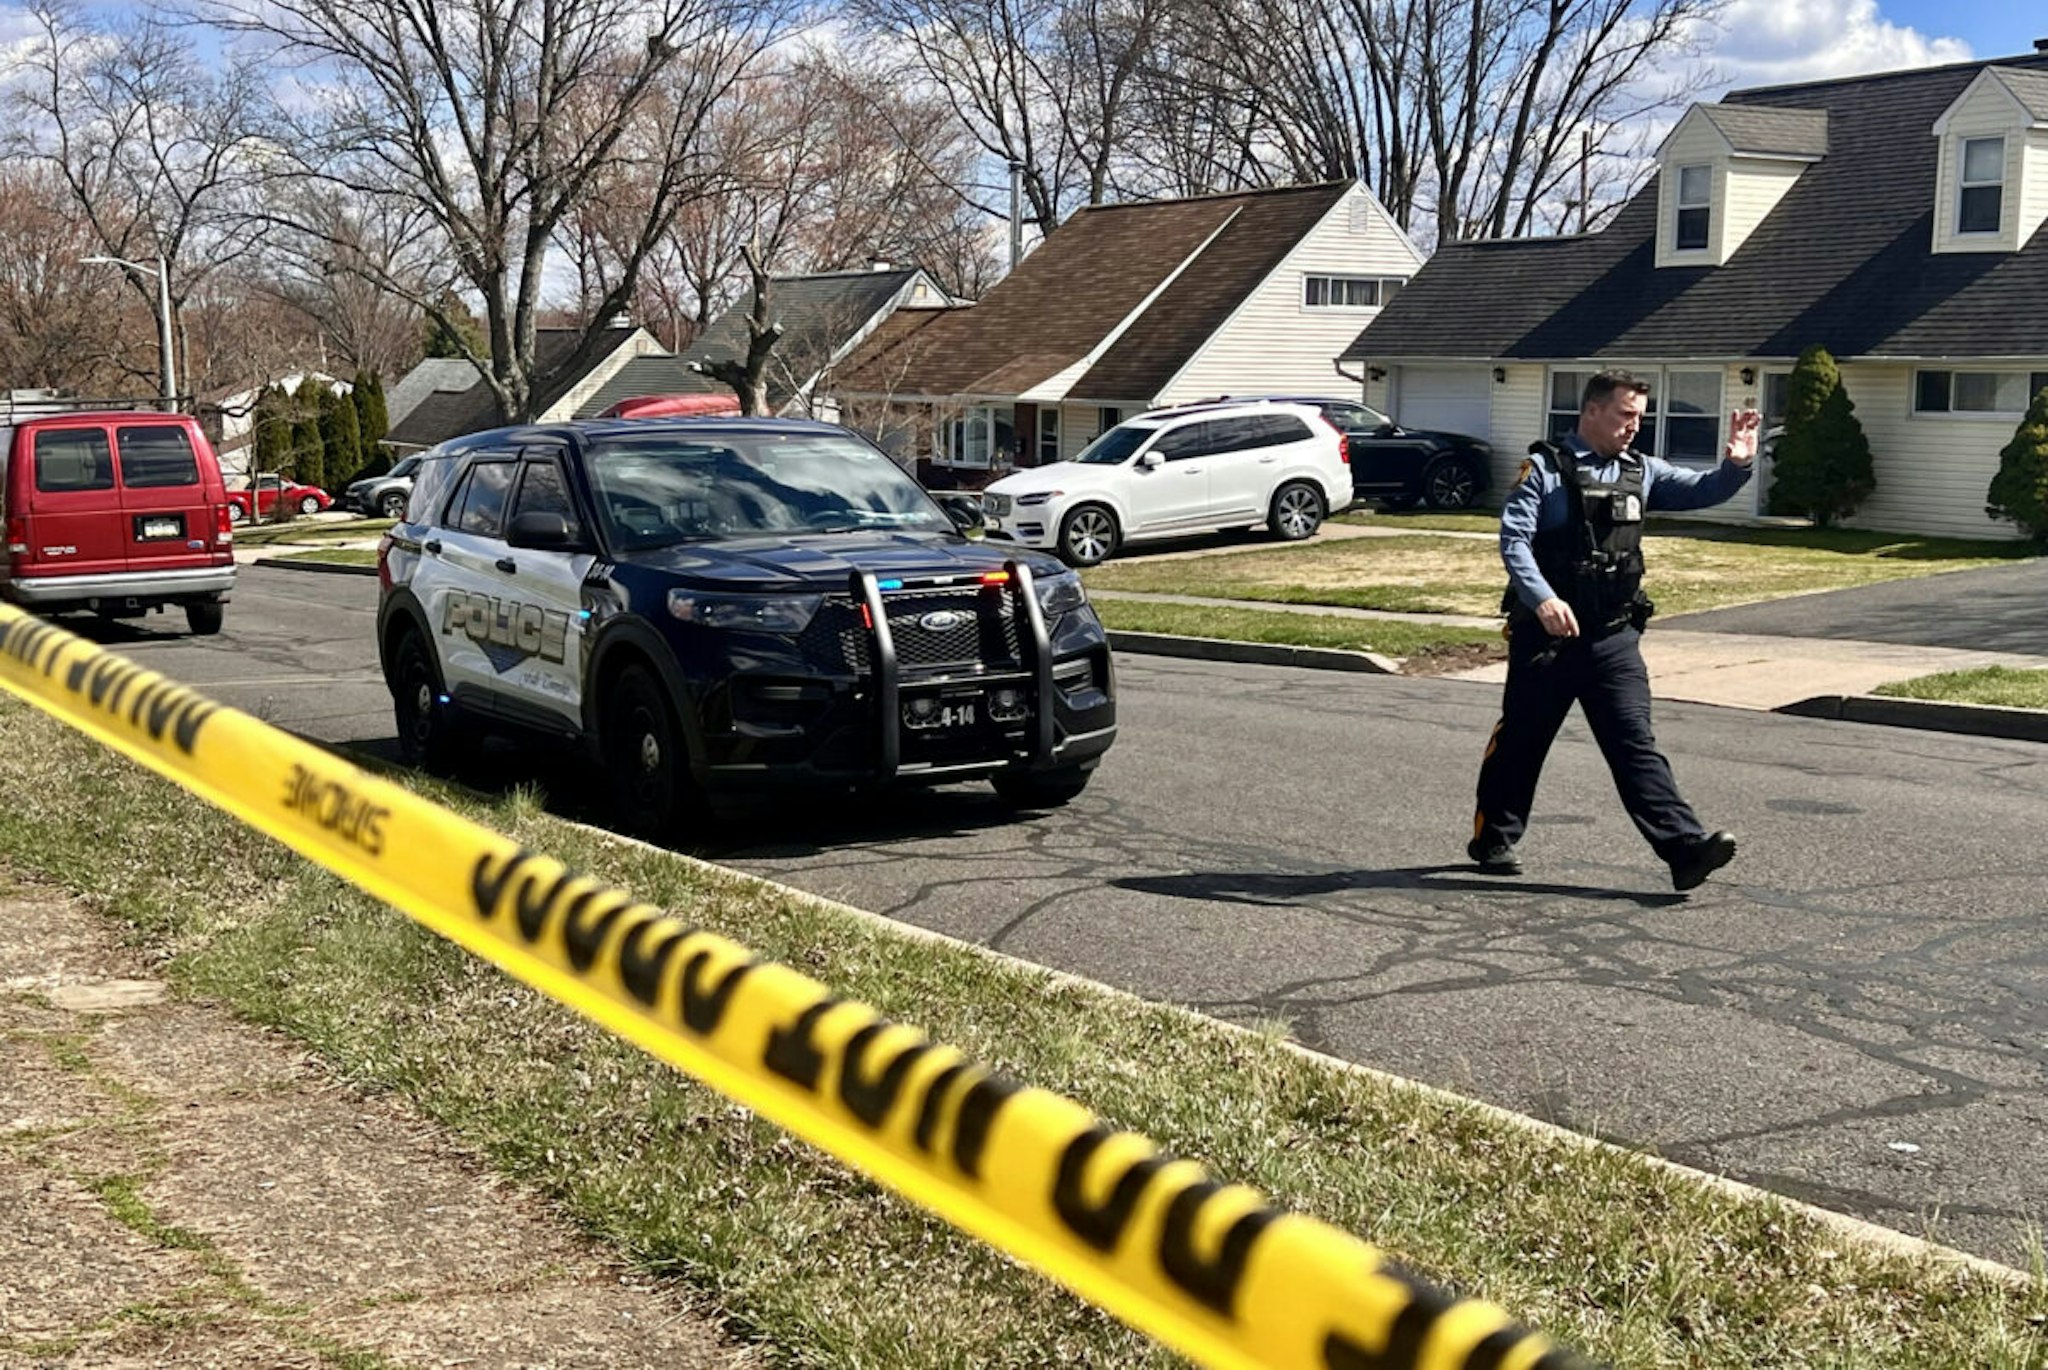 A police officer patrols a neighborhood during an active shooter situation in Levittown, a community within Falls Township, Pennsylvania, where a a shelter-in-place order was issued on March 16, 2024. Three people were killed by gunfire in a Philadelphia suburb on Saturday morning and the suspect was on the loose following a carjacking, local media and the police reported. Police in Middletown Township, just north of Philadelphia, confirmed on their Facebook page that shots had been fired in nearby Falls Township, leaving "several gunshot victims."